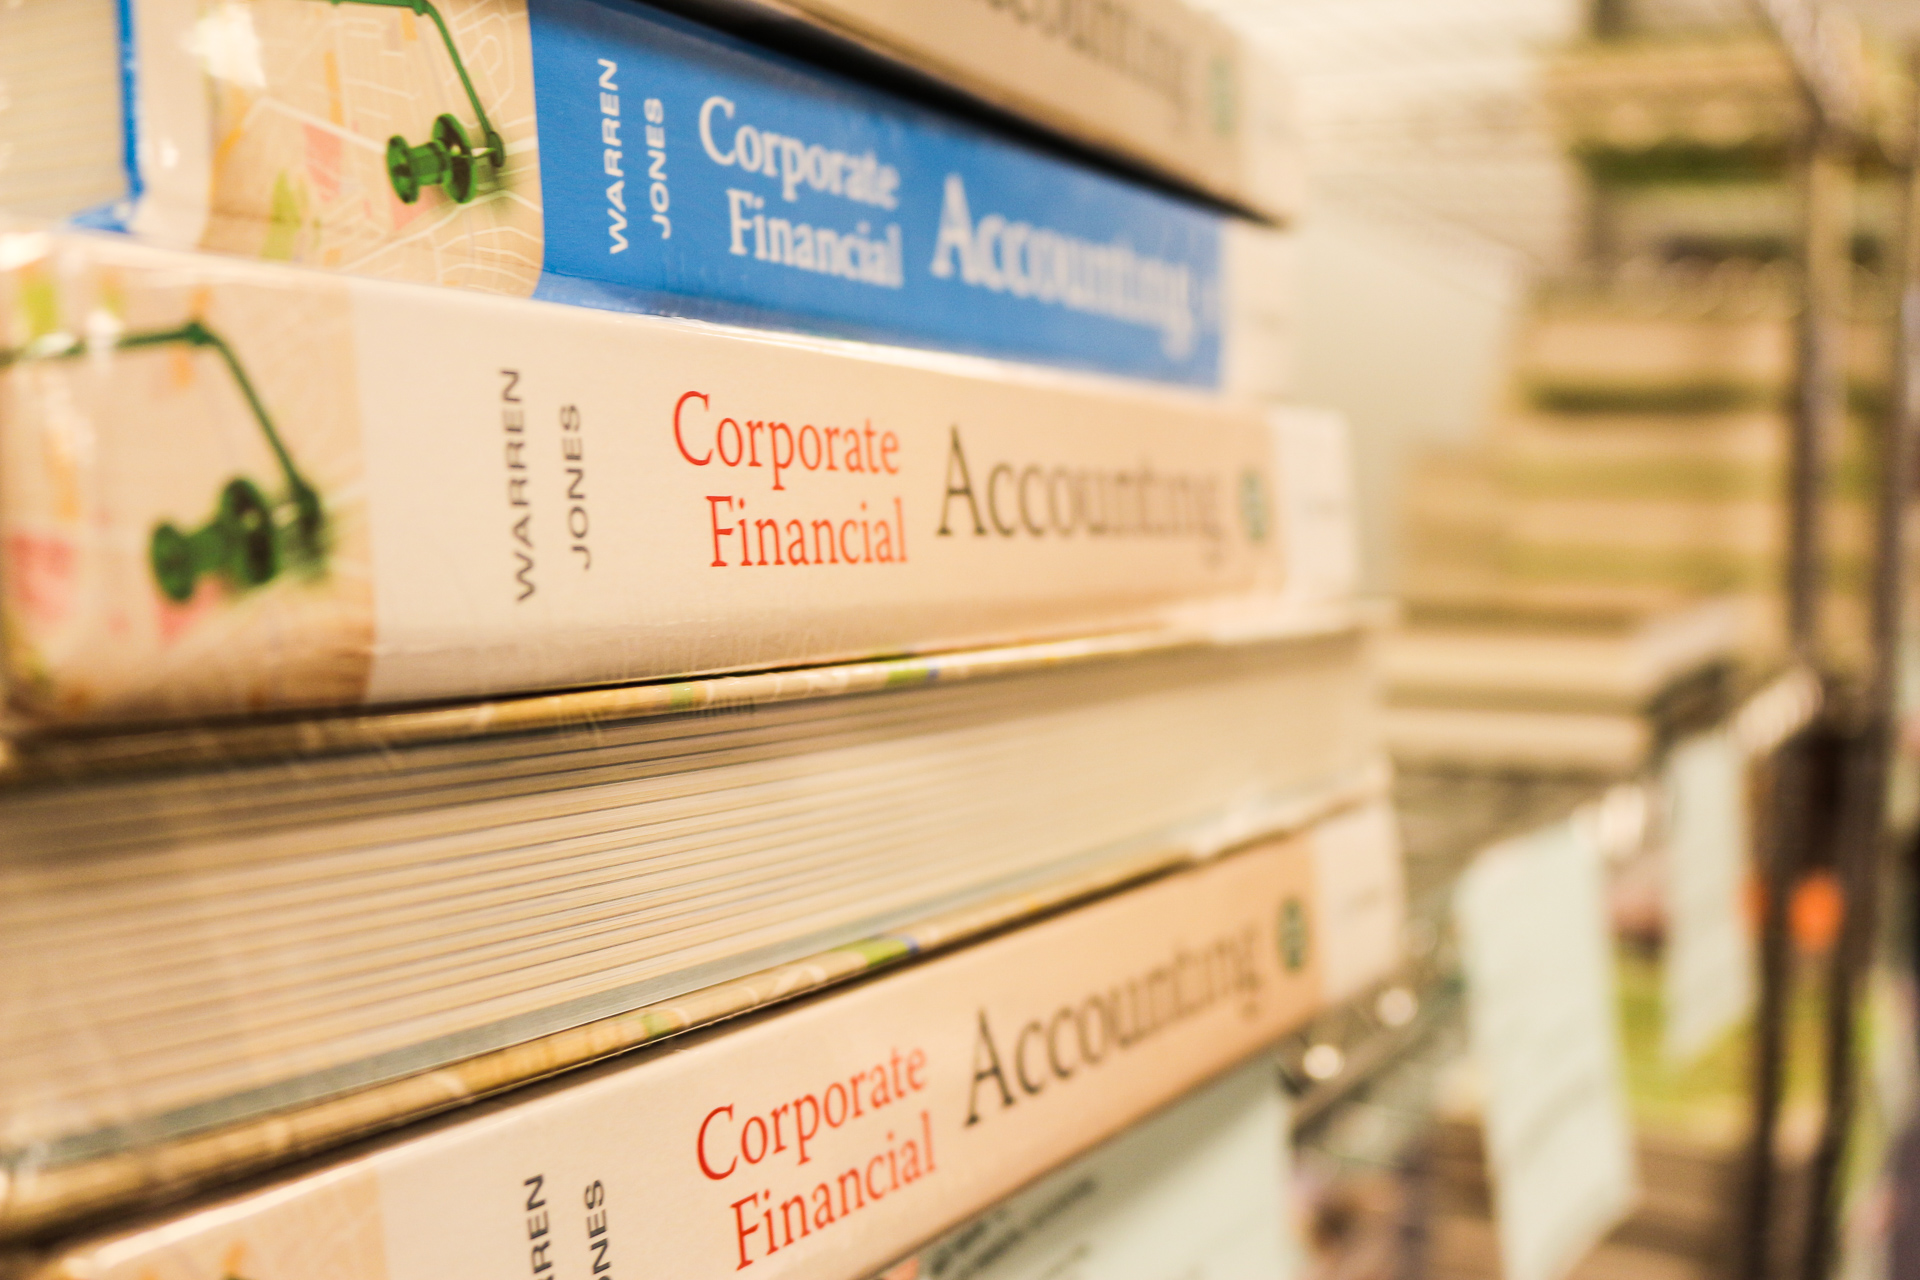 A pile of books reading Corporate Financial